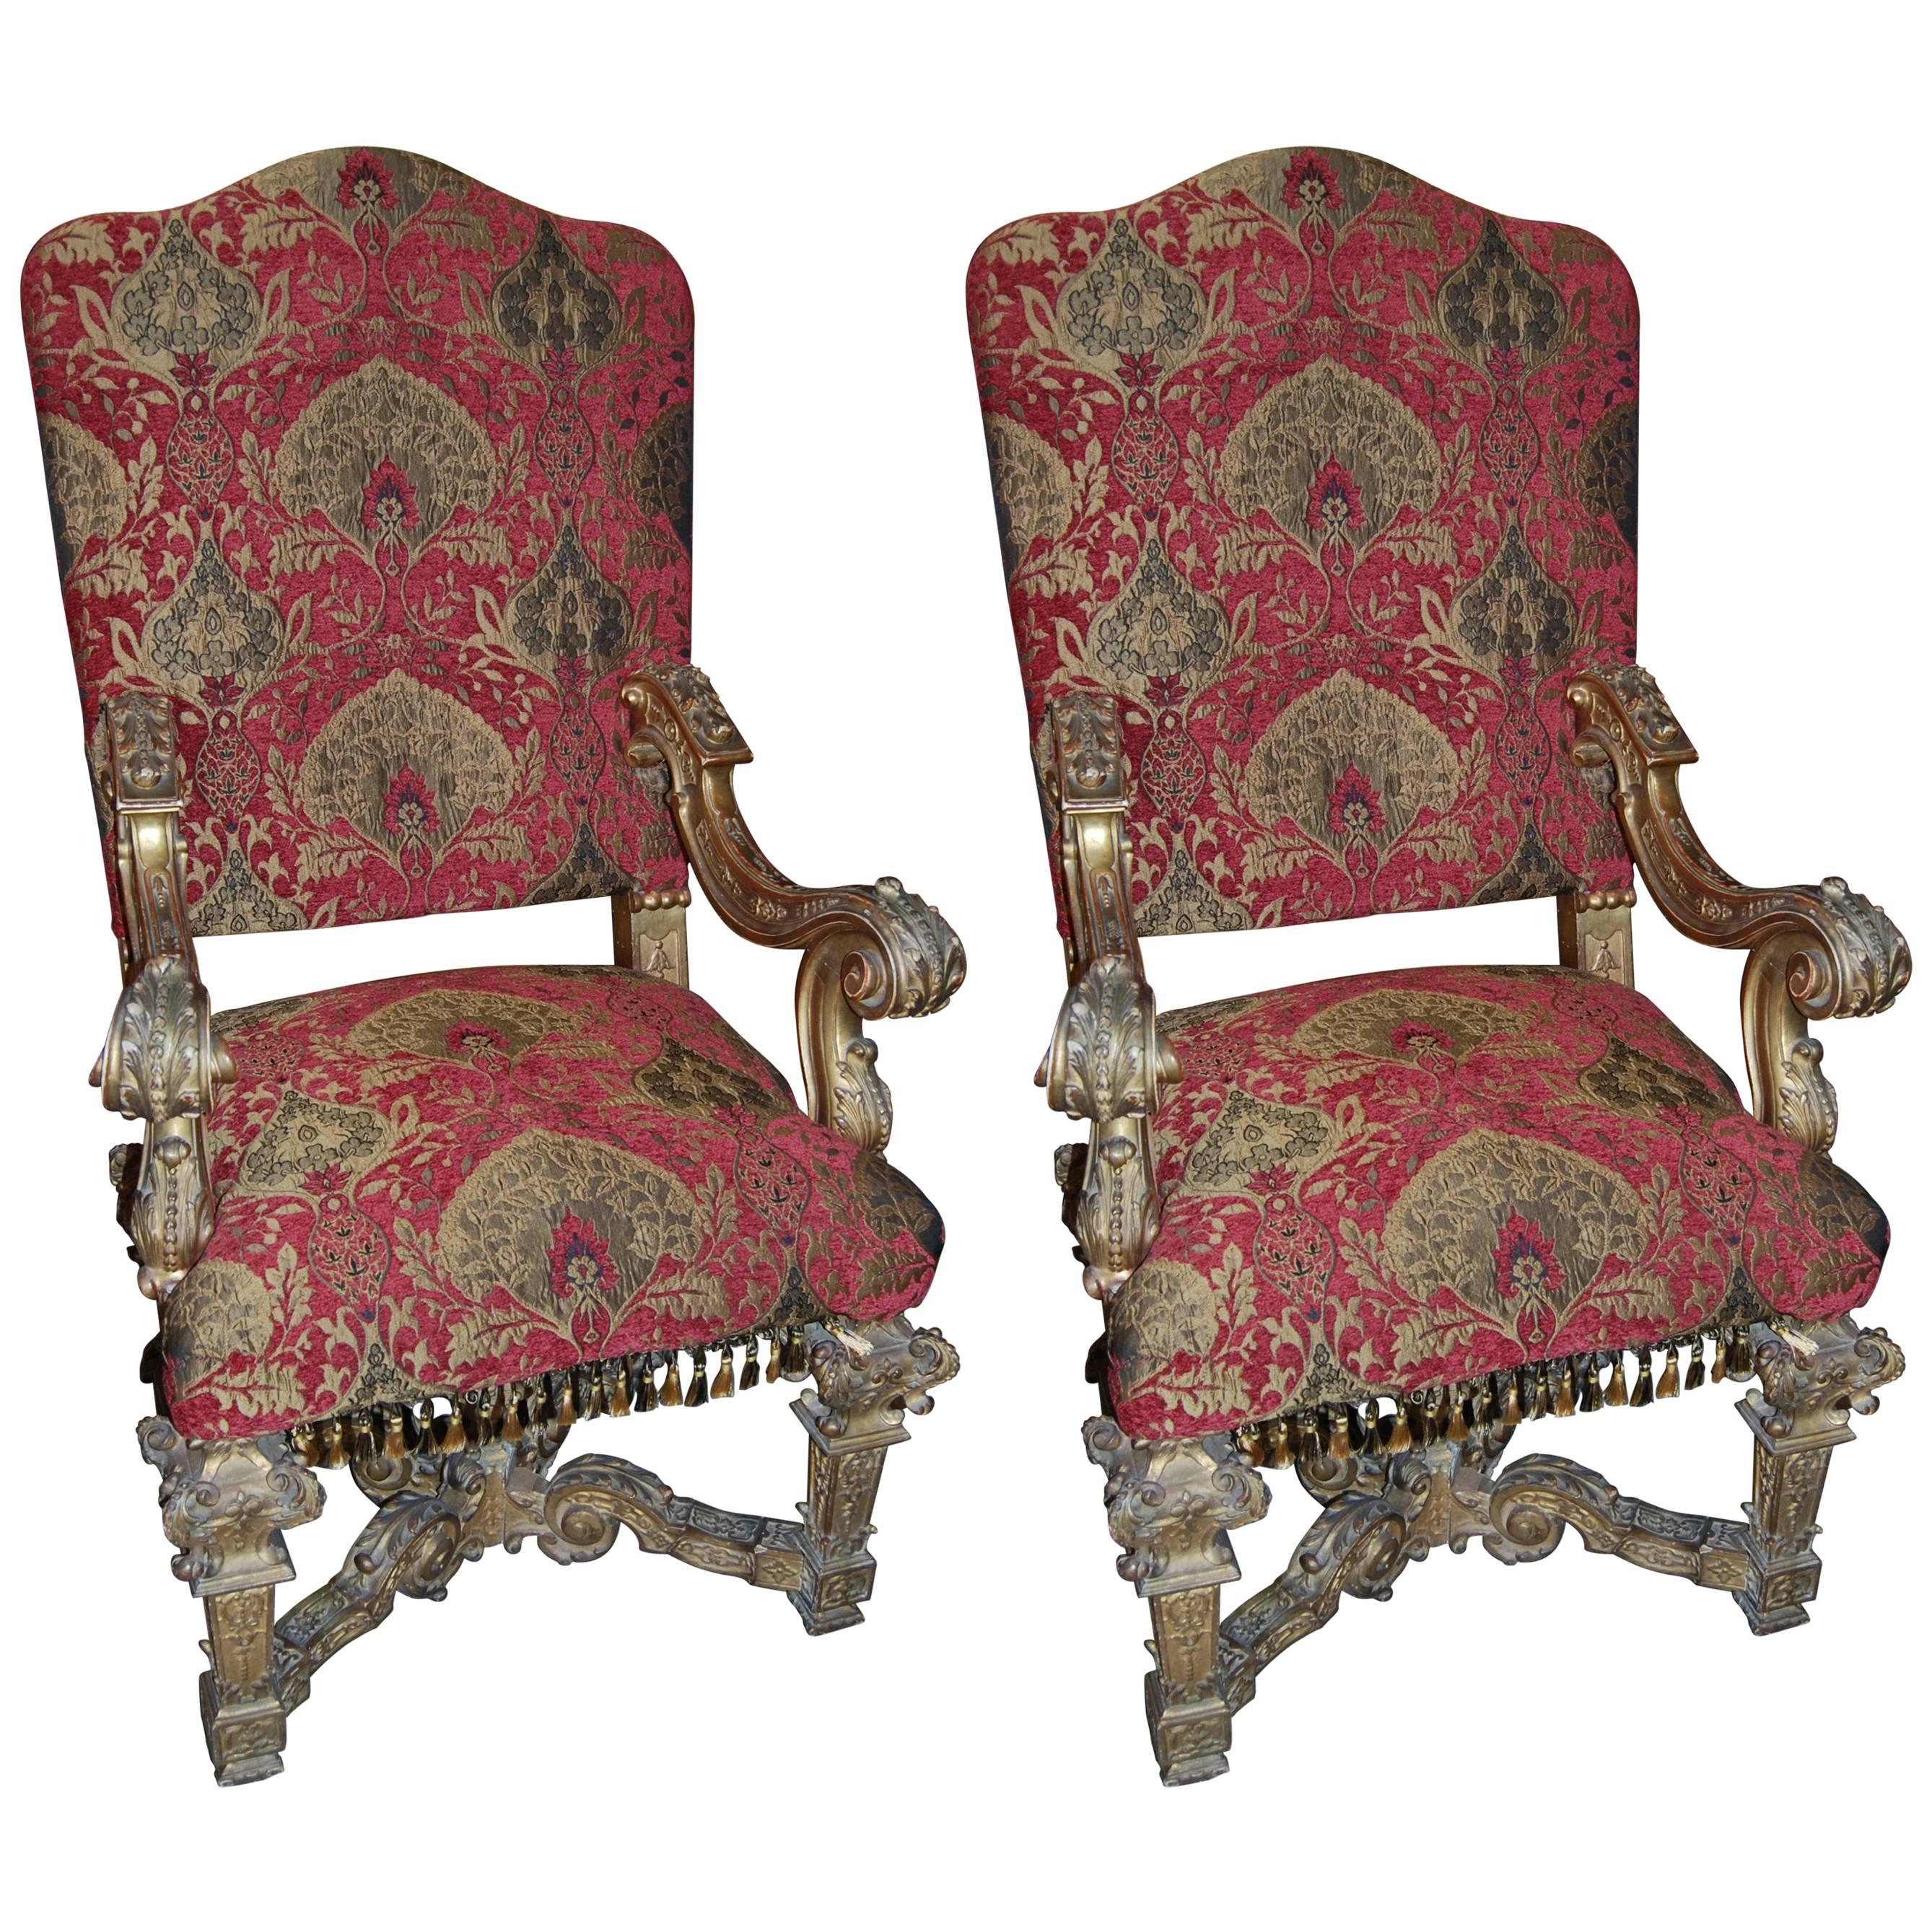 Pair of Louis XIV Giltwood Armchairs